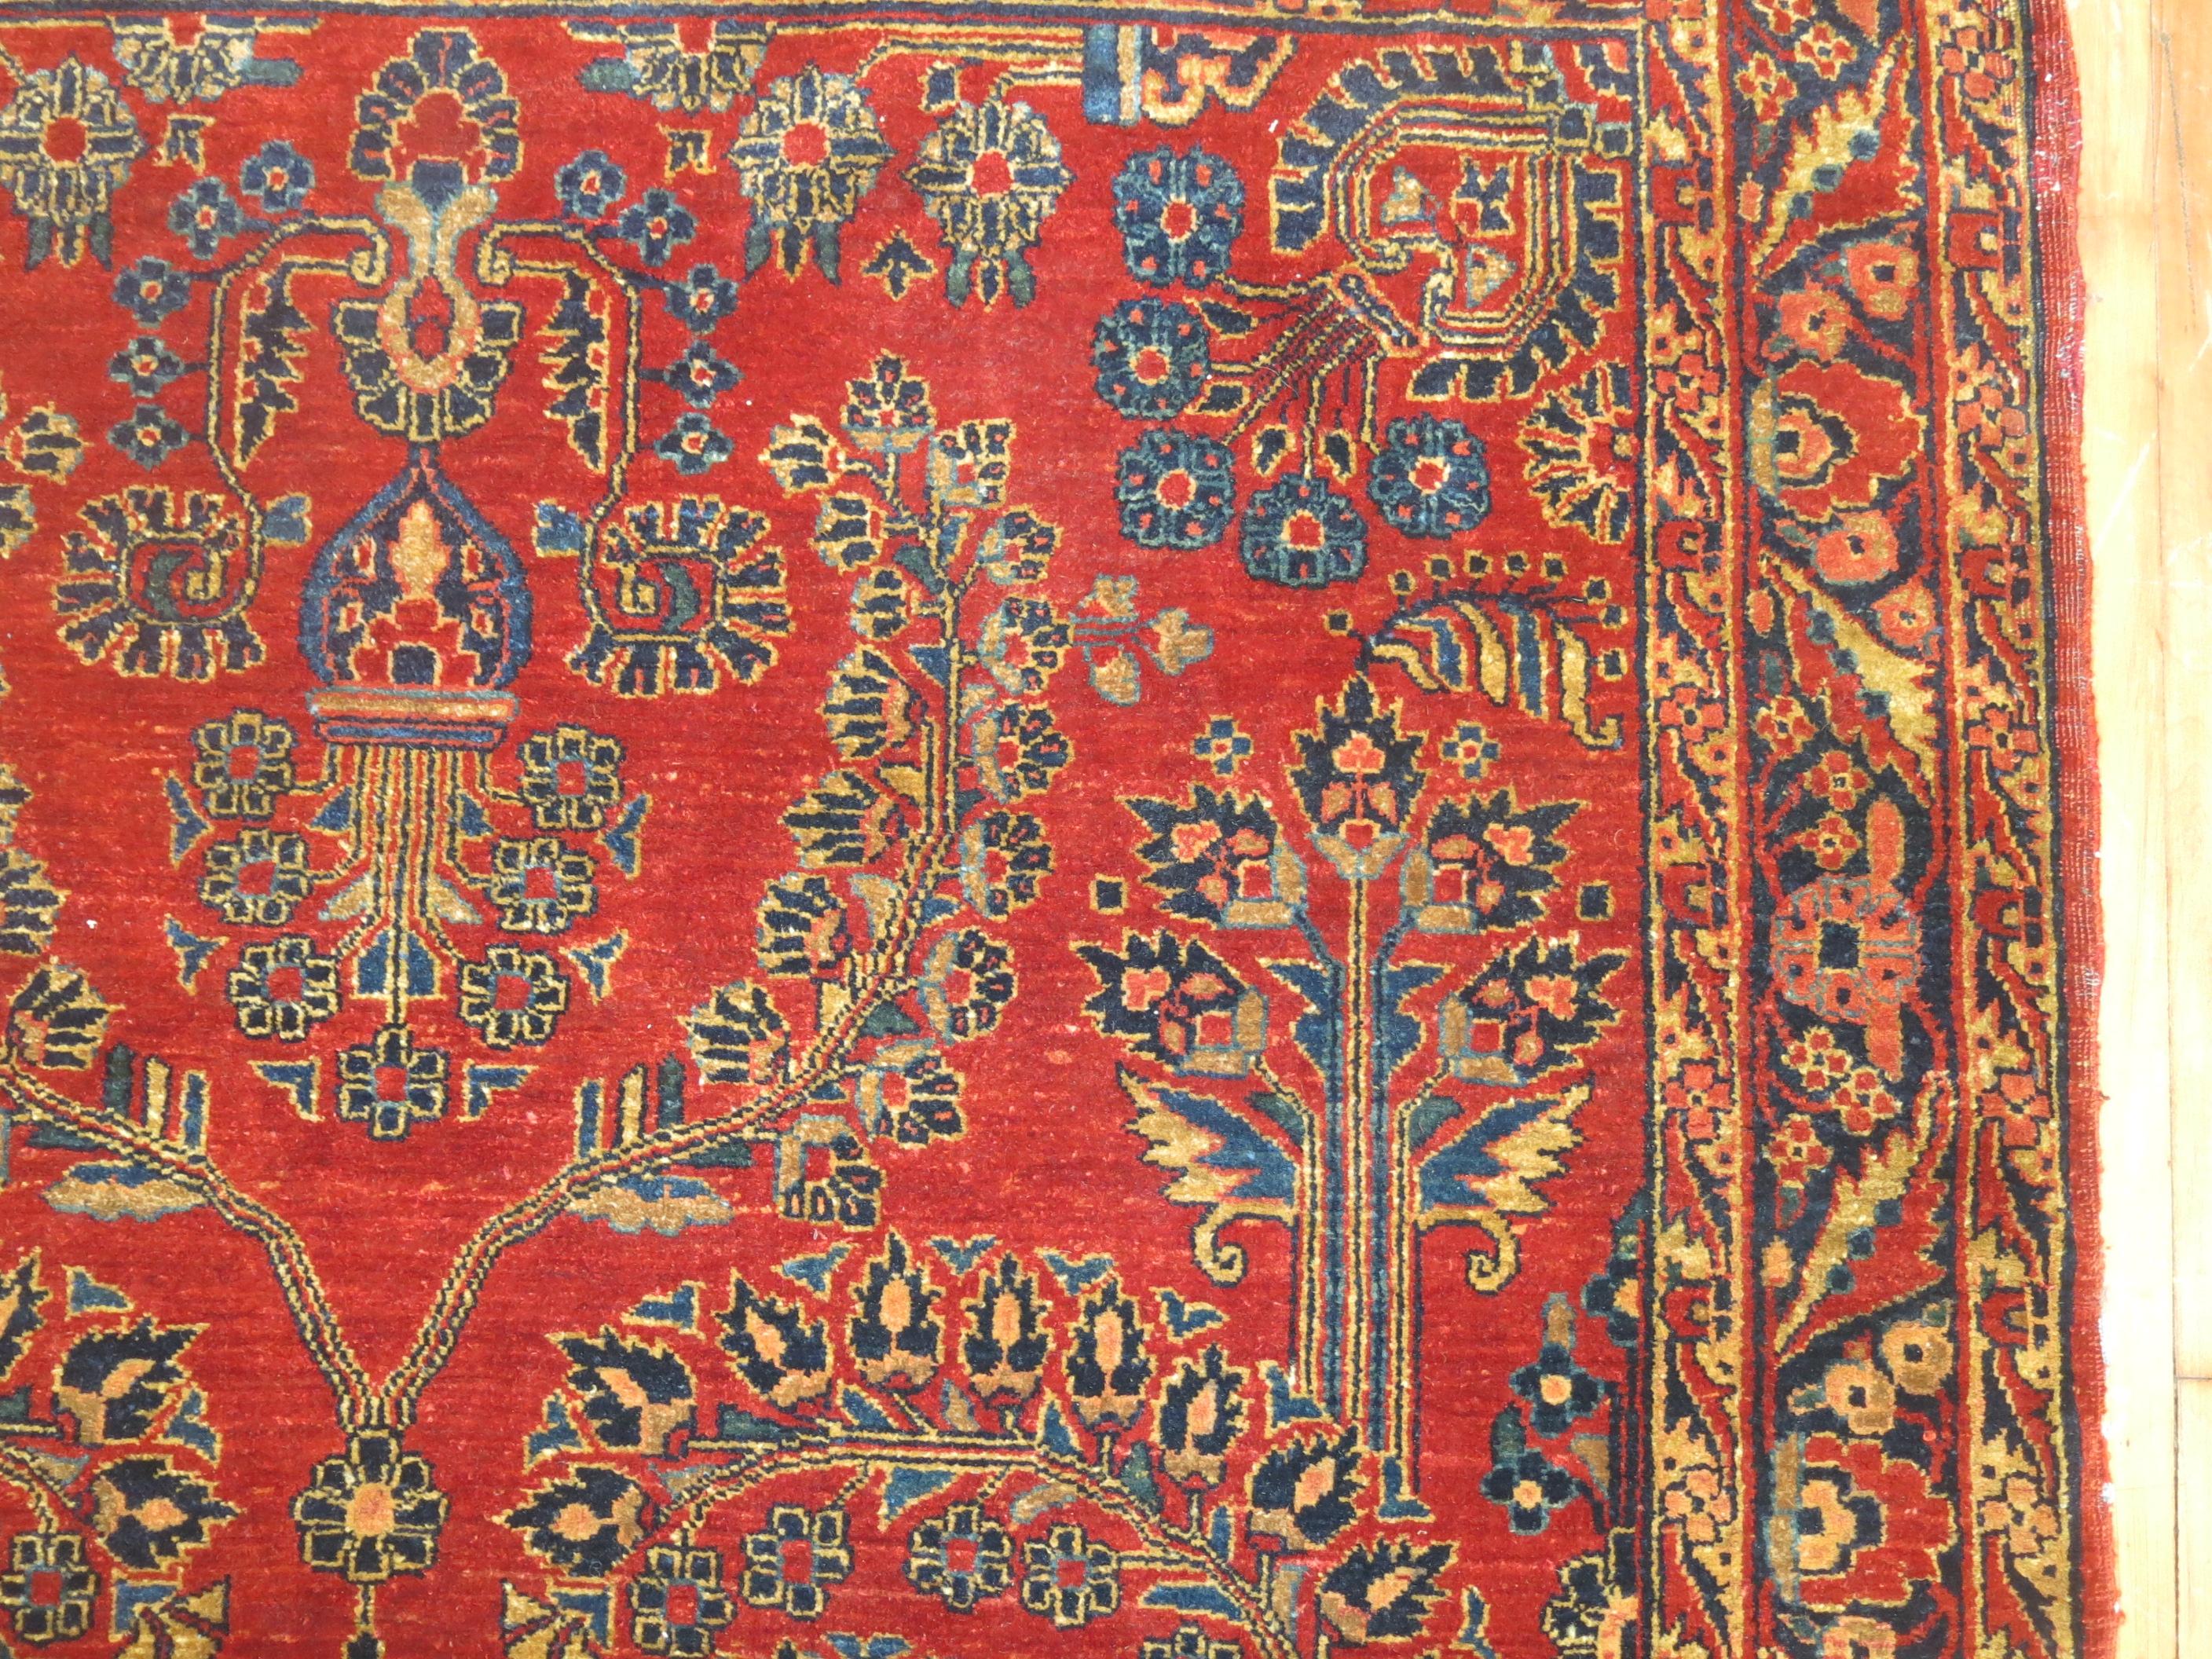 Zabihi Collection Exceptional Red Antique Mohajeran Persian Sarouk Rug In Good Condition For Sale In New York, NY